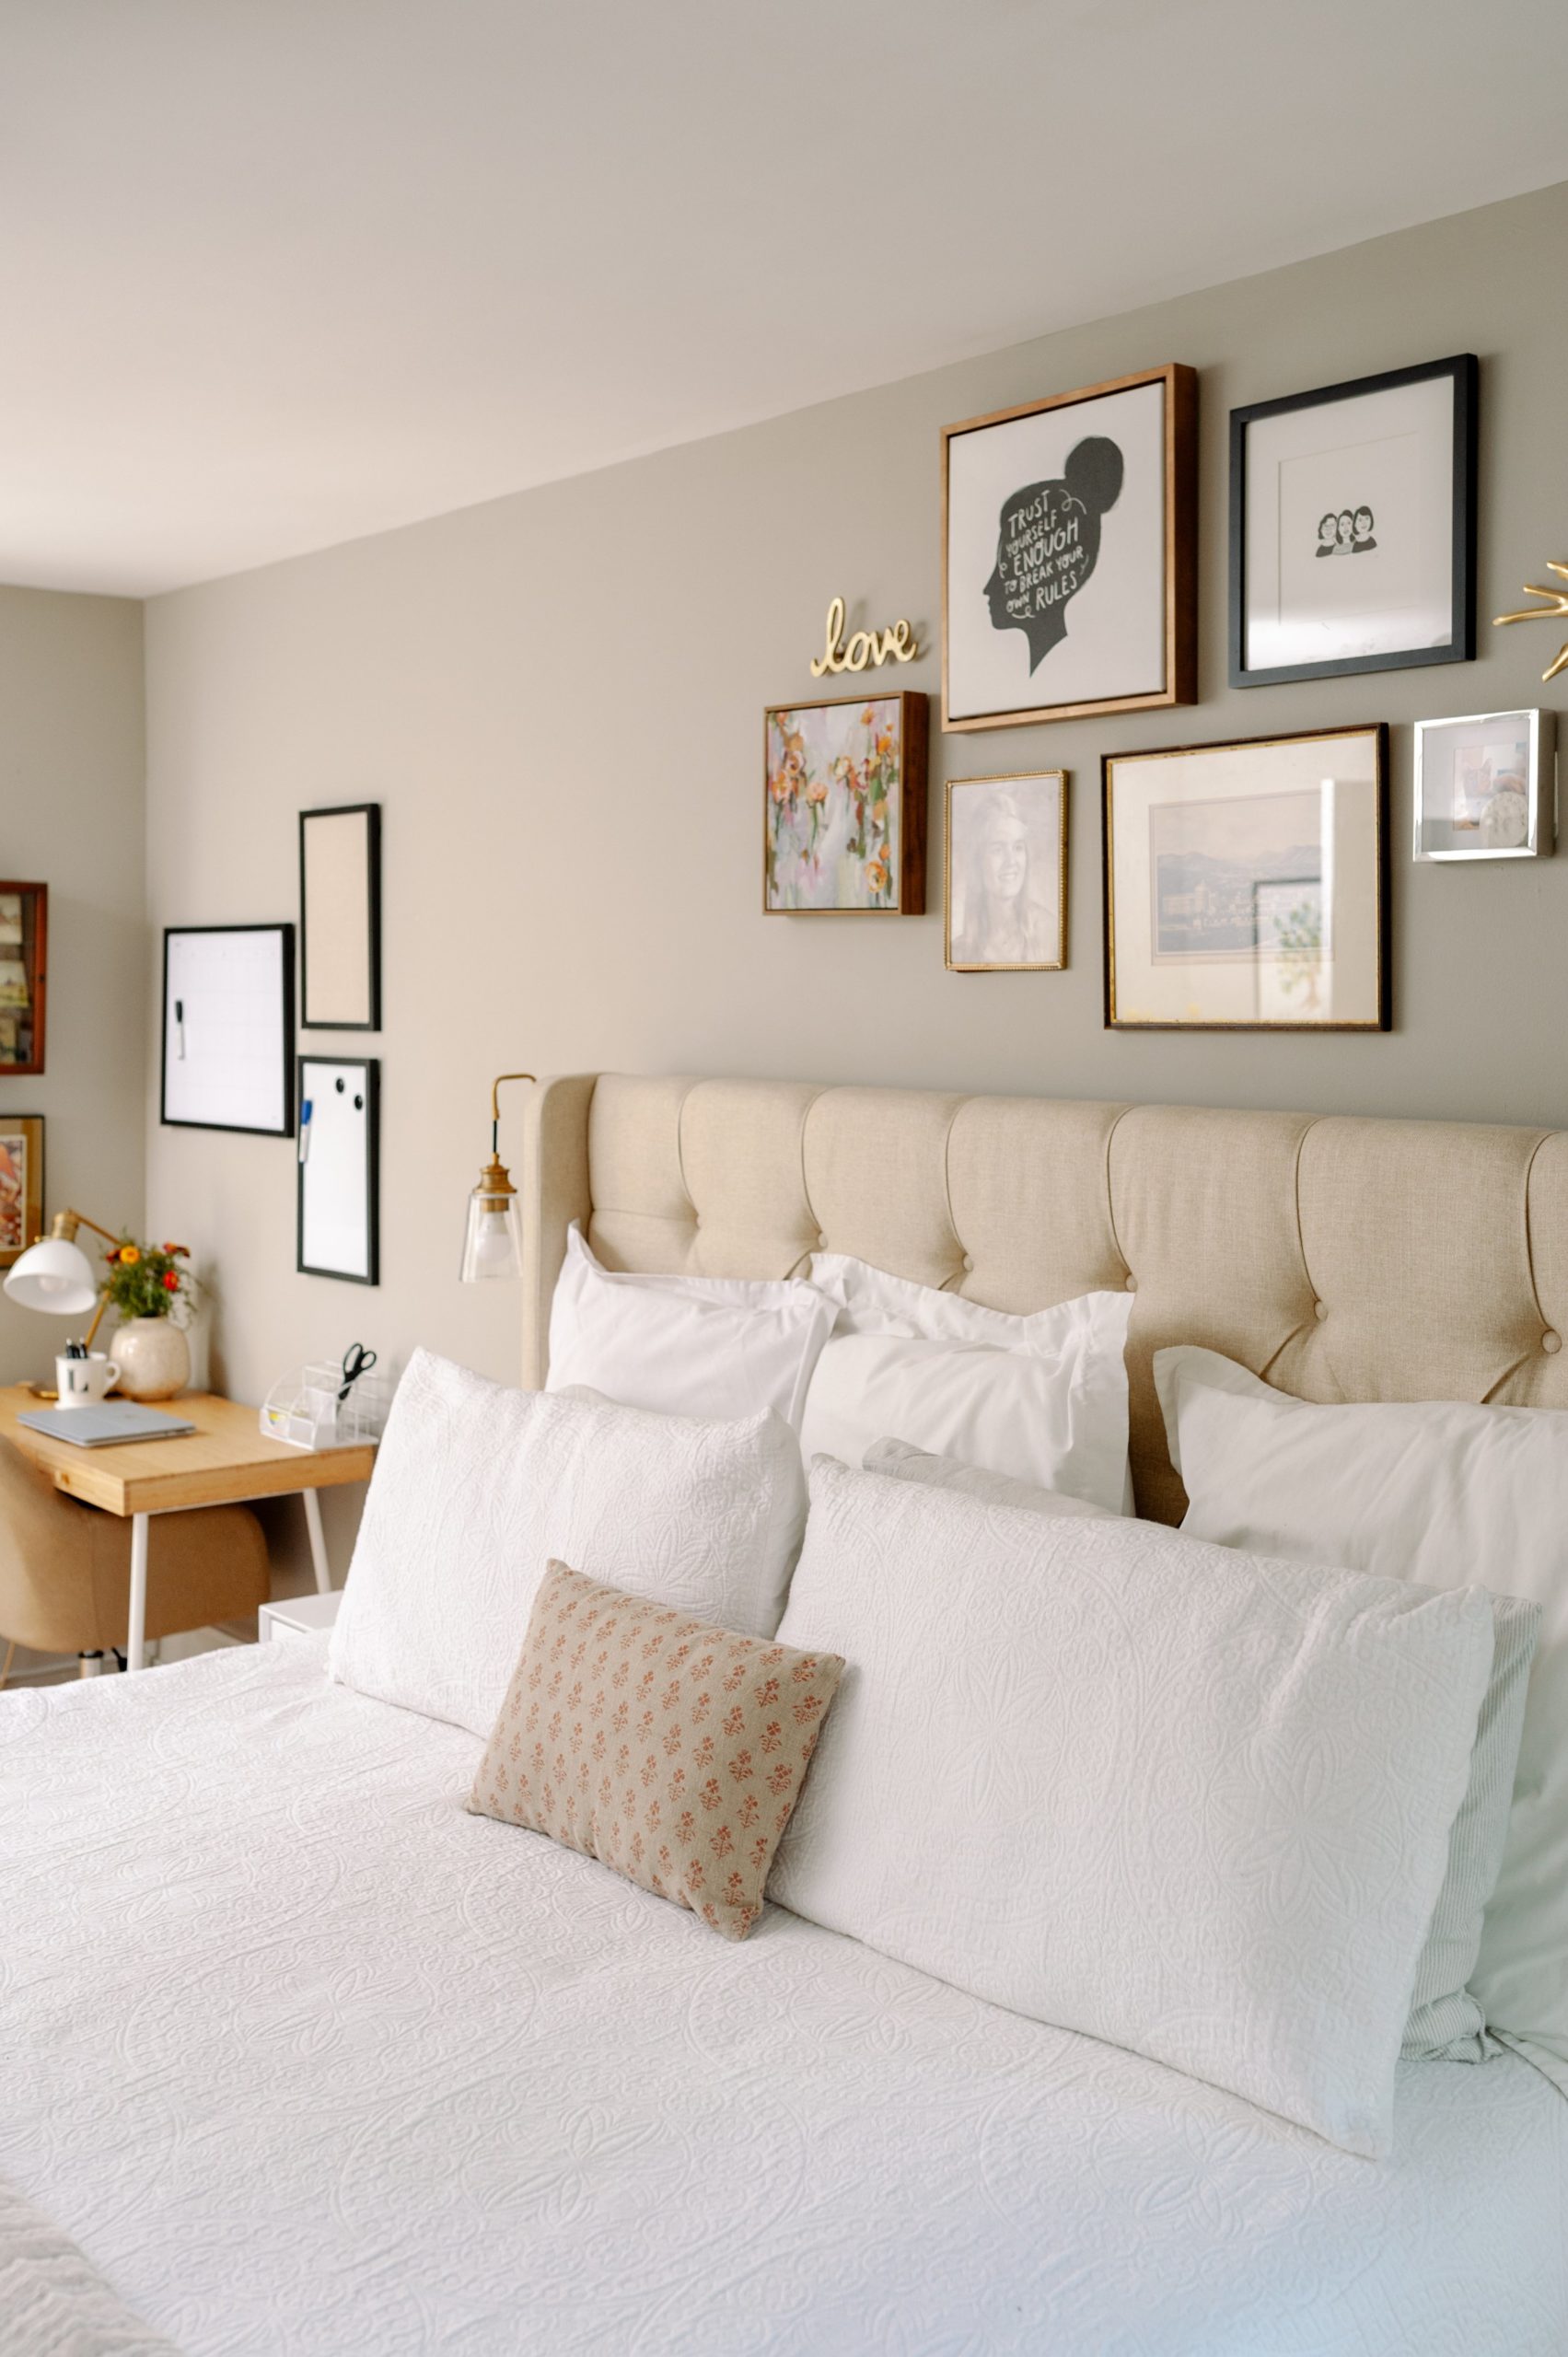 Sherwin Williams Mindful Gray Bedroom with Gallery Wall and Upholstered Beige Headboard; office in bedroom